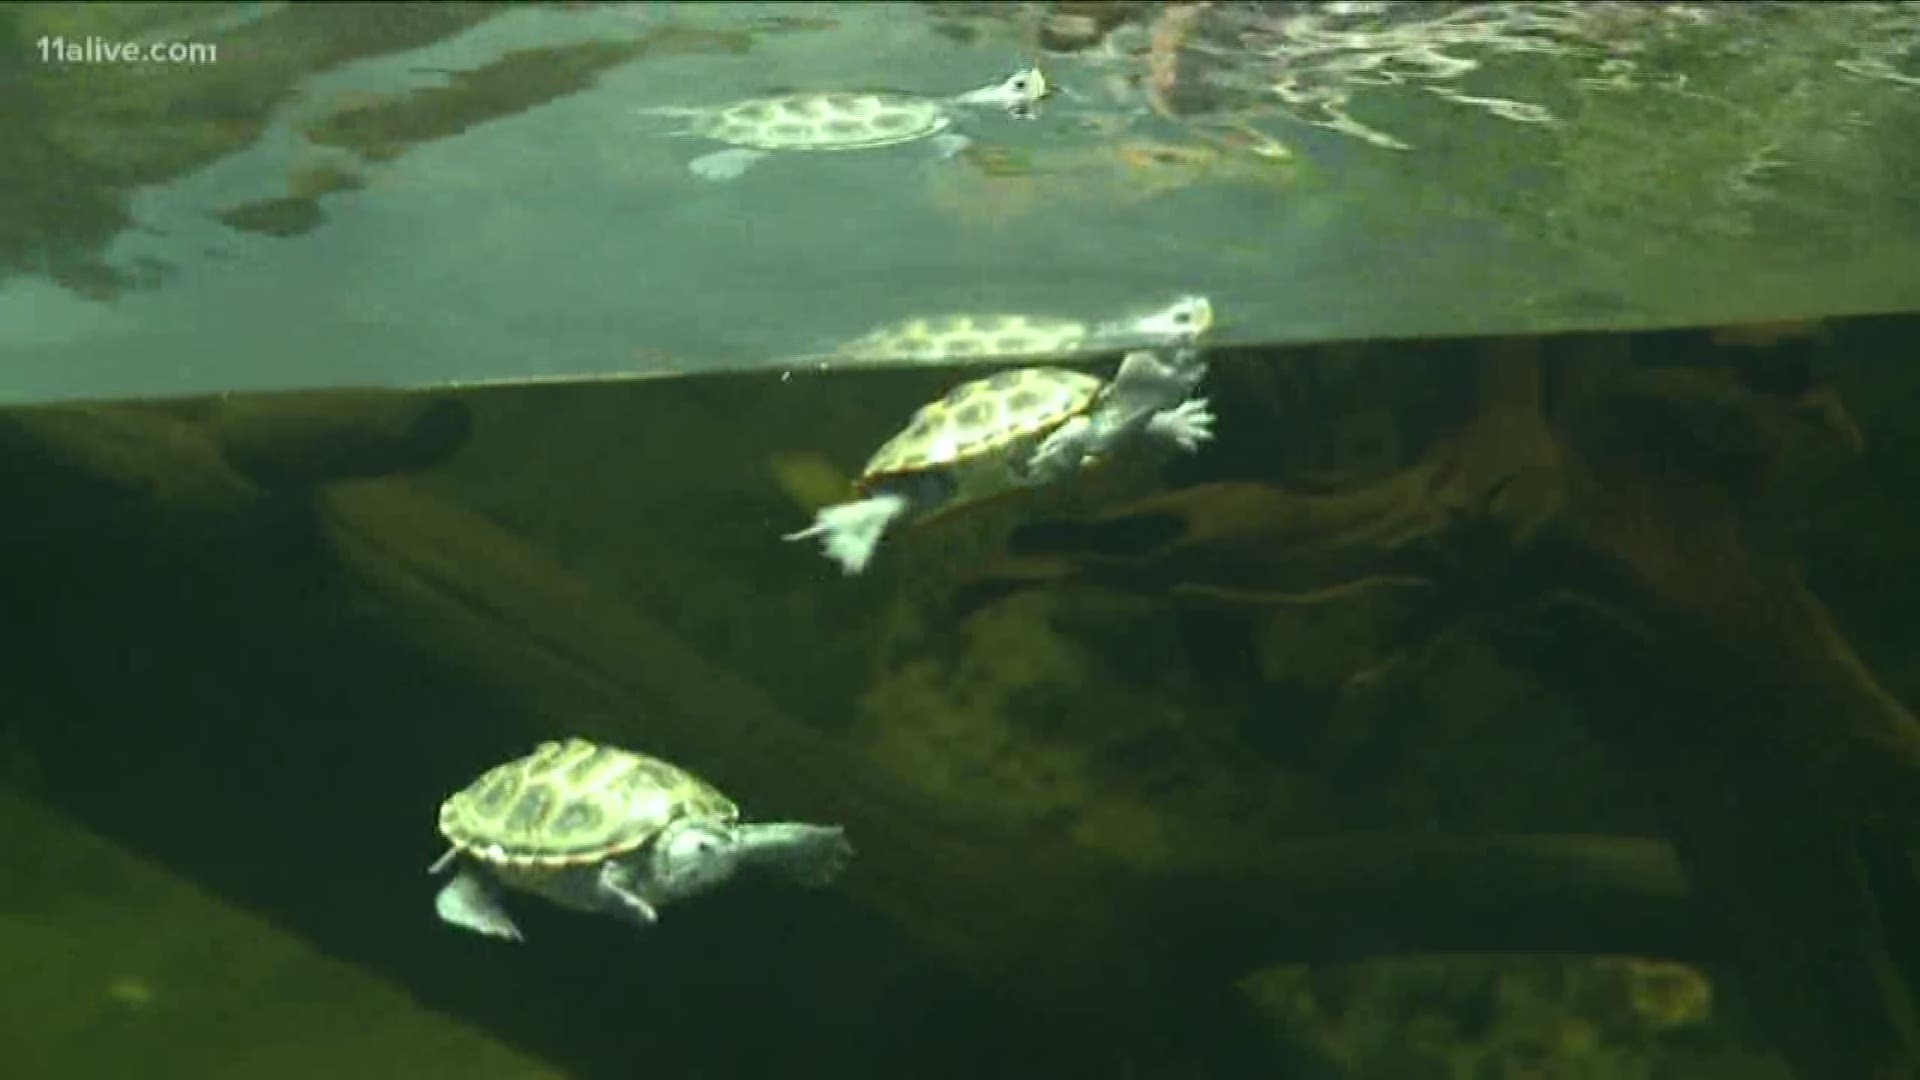 What you should know about the Diamondback terrapins at Zoo Atlanta in this episode of Into the Wild.